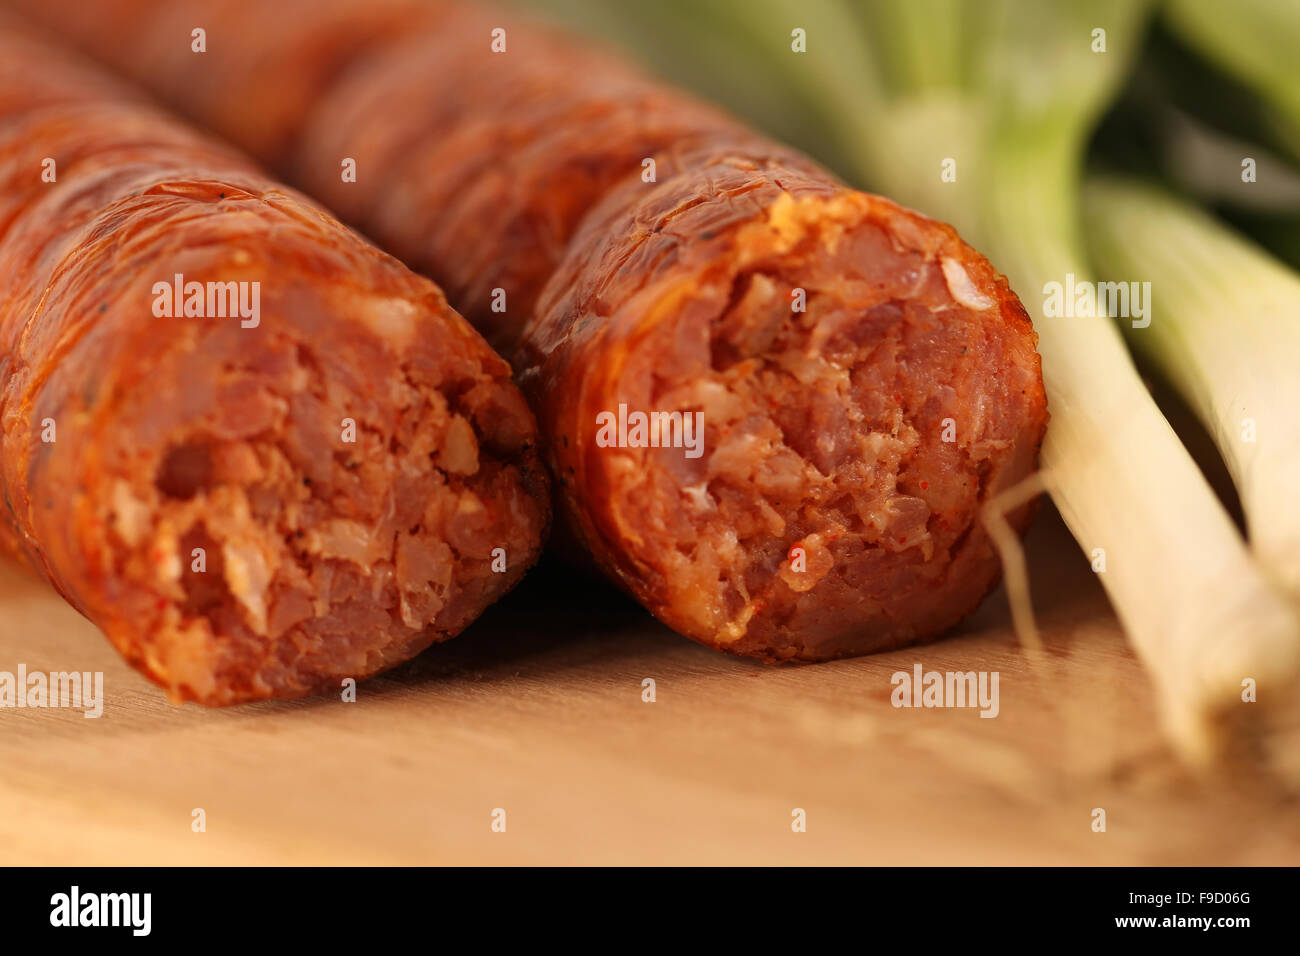 Delicious pork sausage with onion on wooden plate Stock Photo